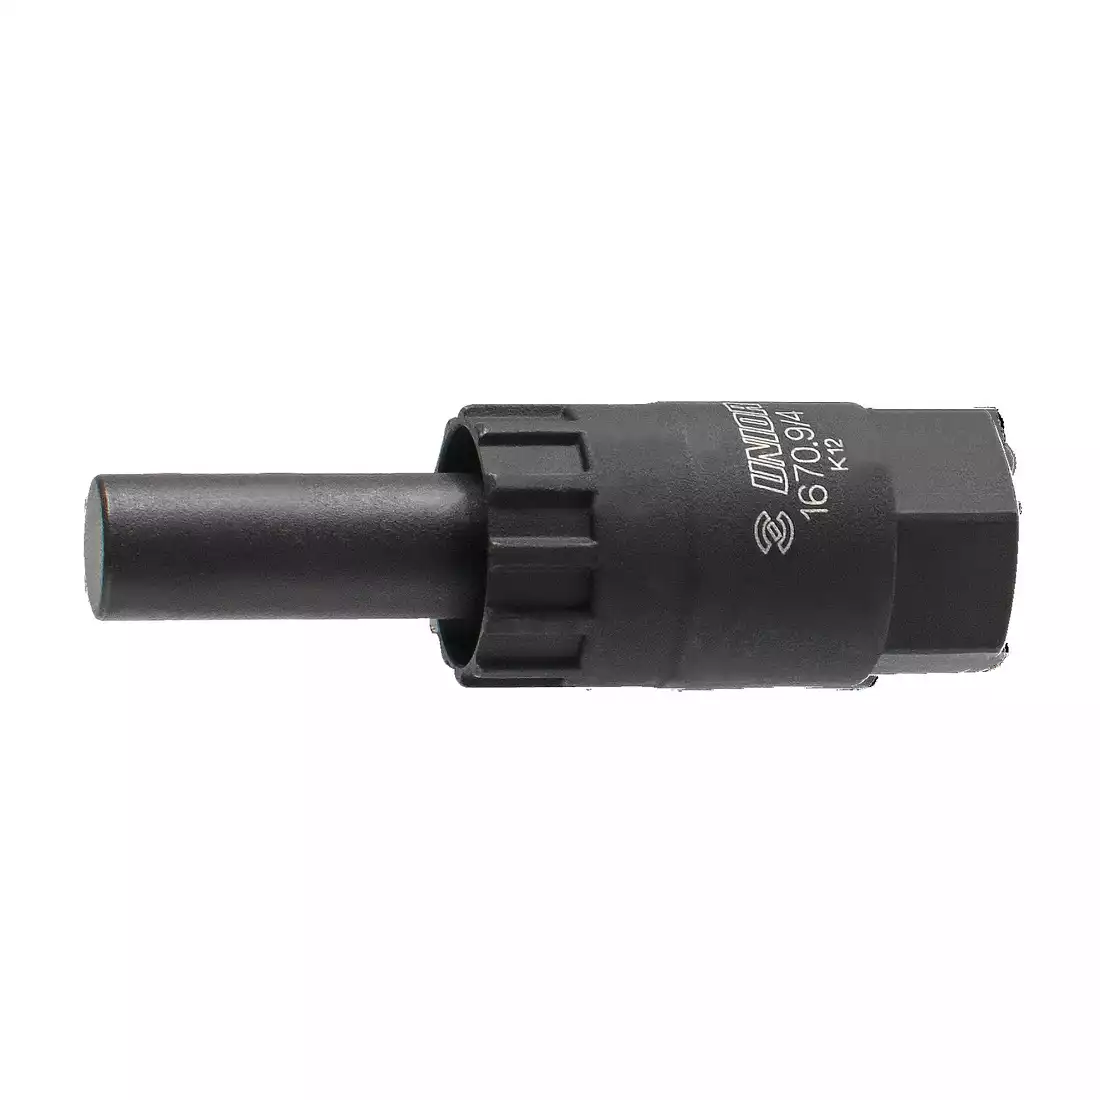 UNIOR cassette key with 12 mm pin 1670.9/4 